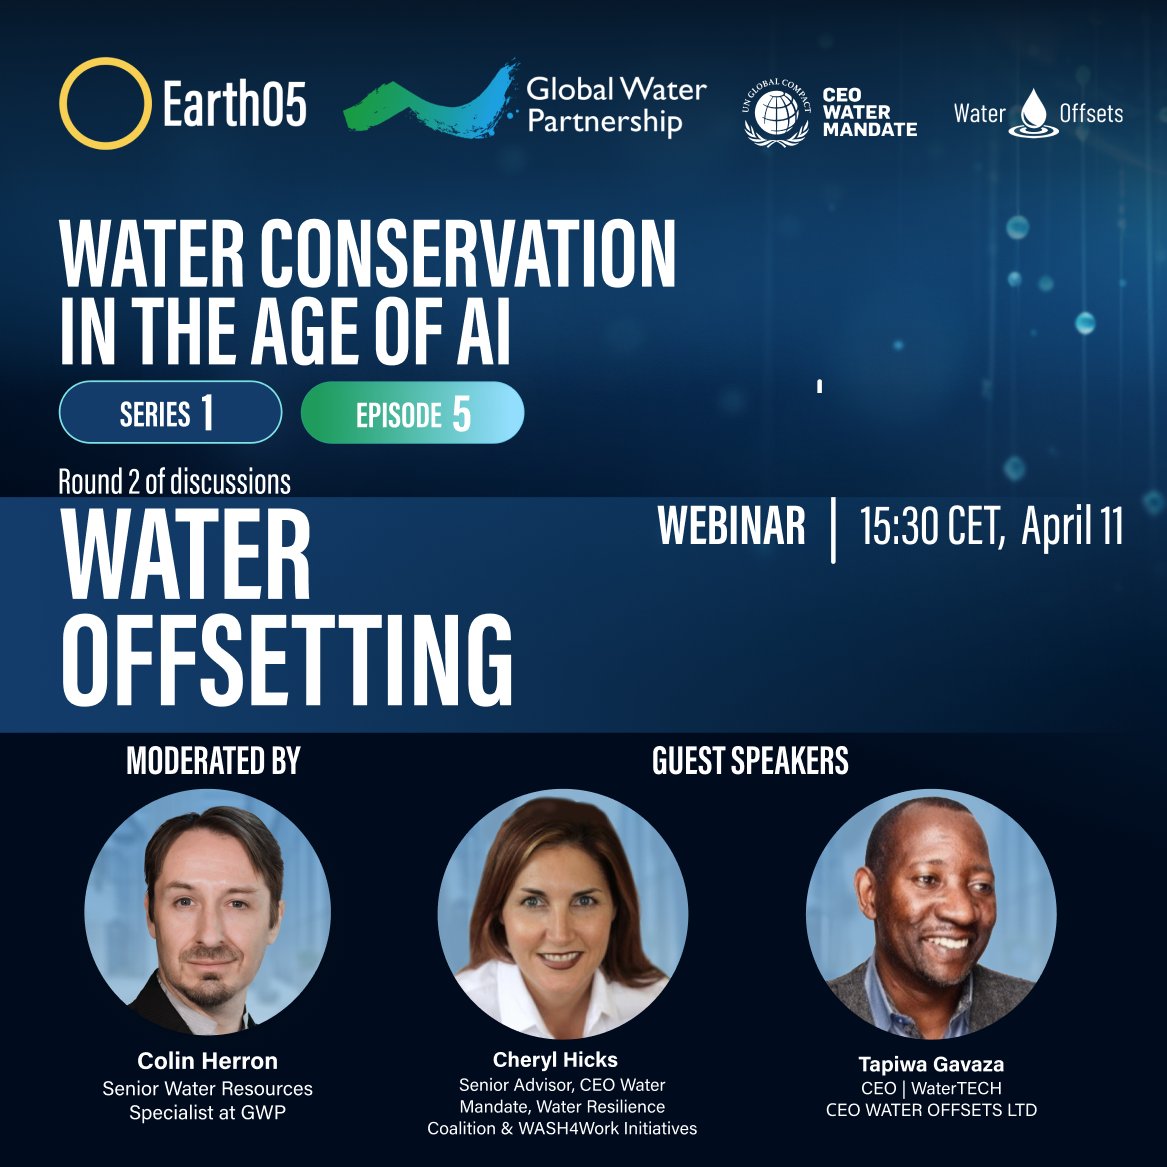 👀 Ready to learn about #WaterOffsetting strategies and how AI can be used in that process?

Join tomorrow’s event: #Water Offsetting – a discussion under the @Earth05fdn series on #WaterConservation in the Age of AI.

Learn more & register 👉 bit.ly/3VITfGv